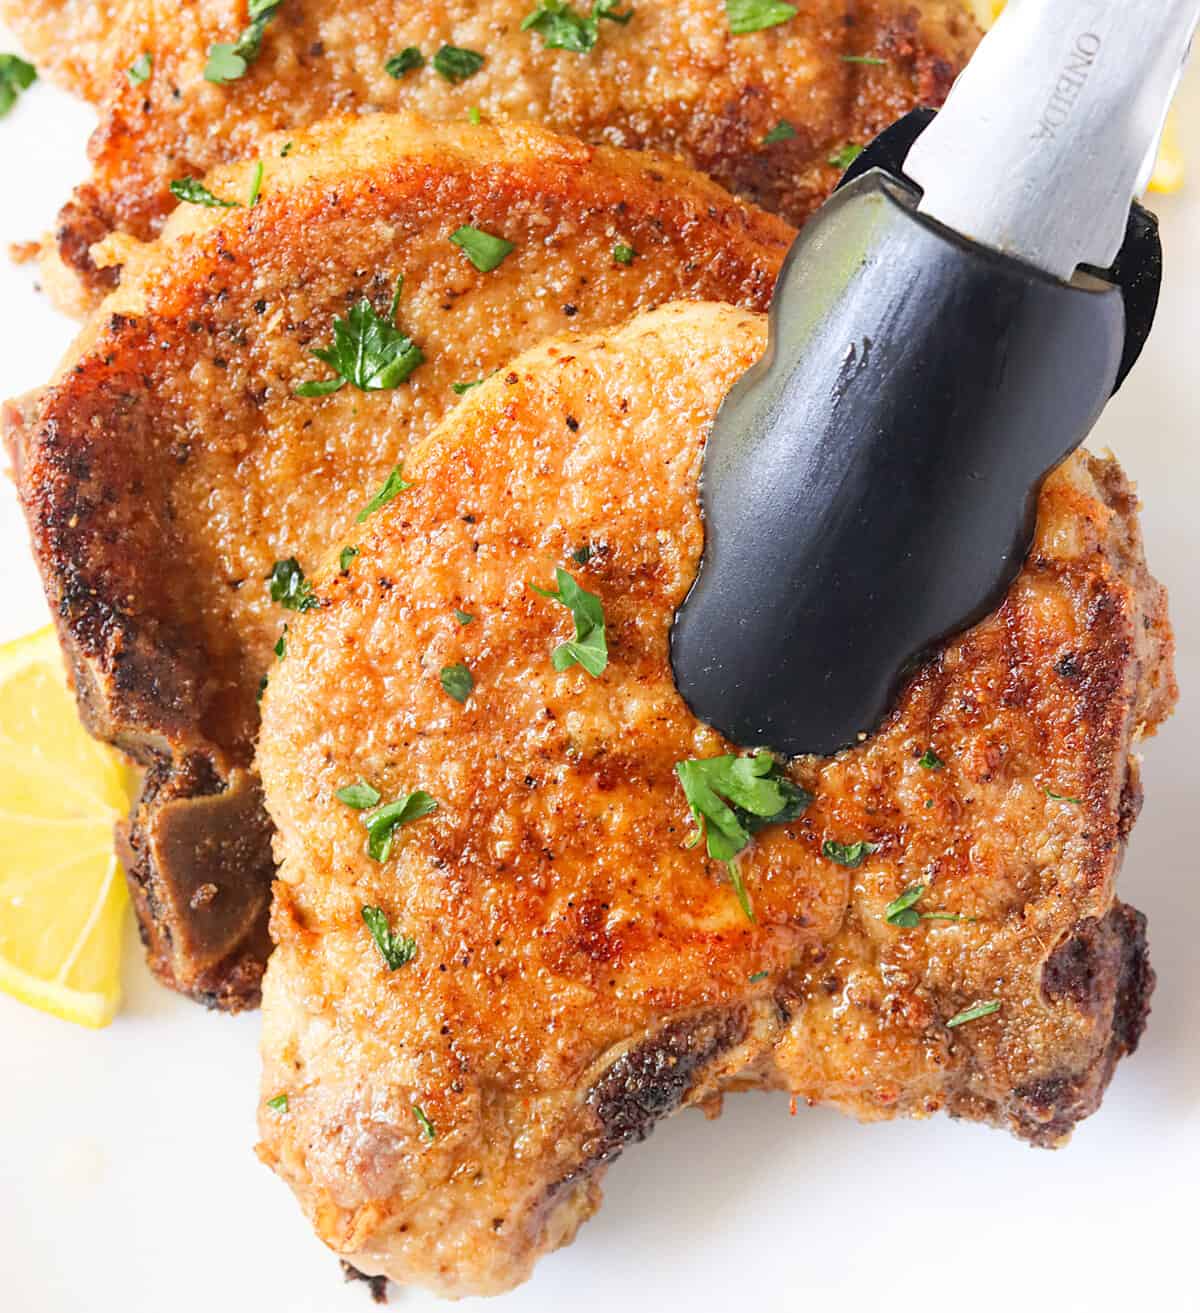 The best fried pork chops hot off the stove